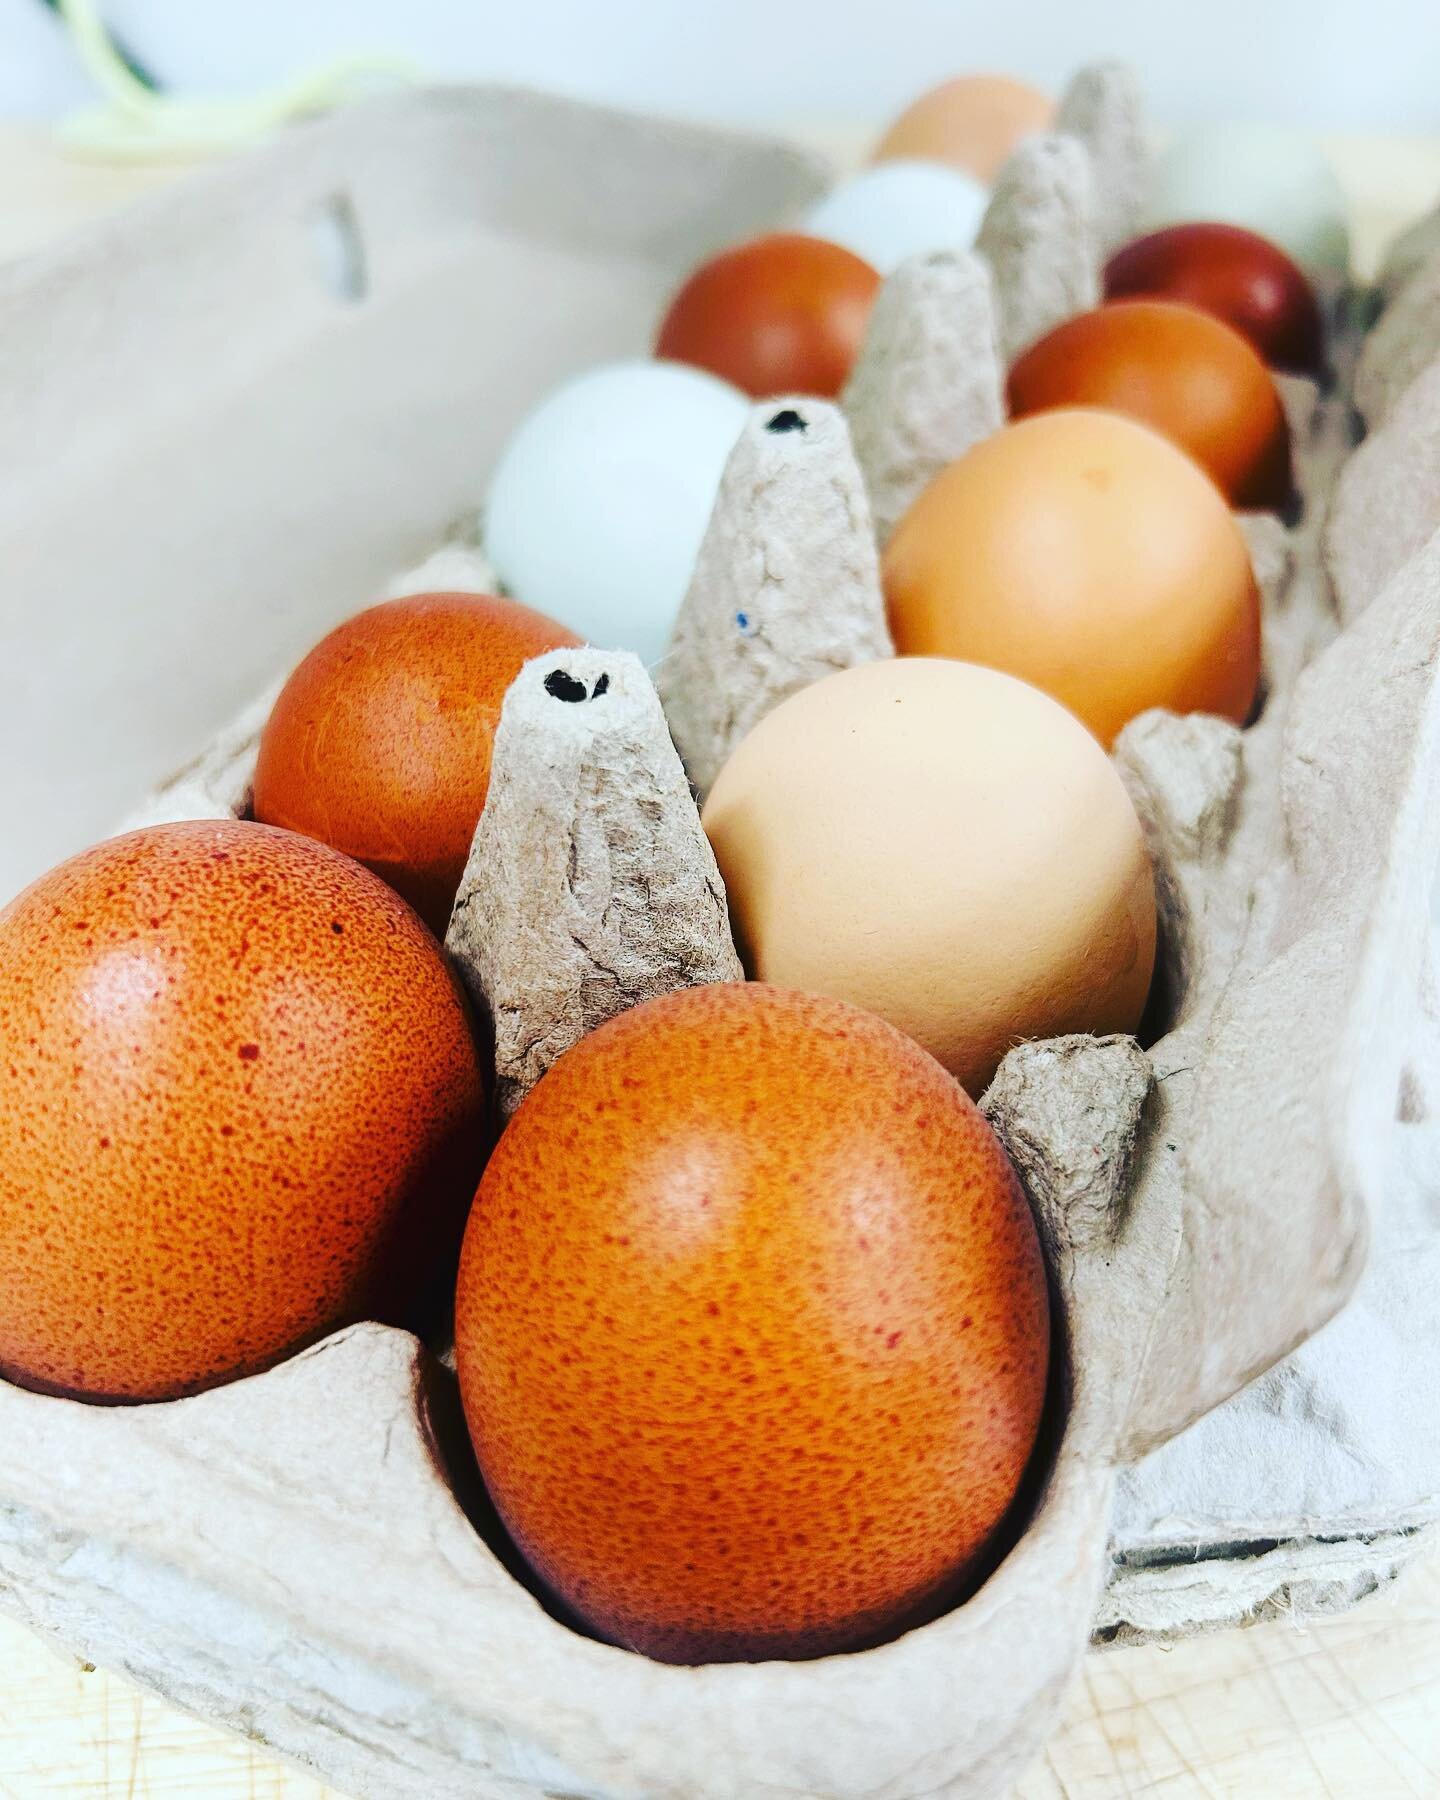 Every day, a little bit different. Little tweaks here and little tweaks there. Just enough to make it as perfect as we can. 
.
.
.
#pasture42farm #eggs #pasta #artisan #localislovely #local #localfood #eatlikeyougiveadamn #realfood #madebyhand #norca